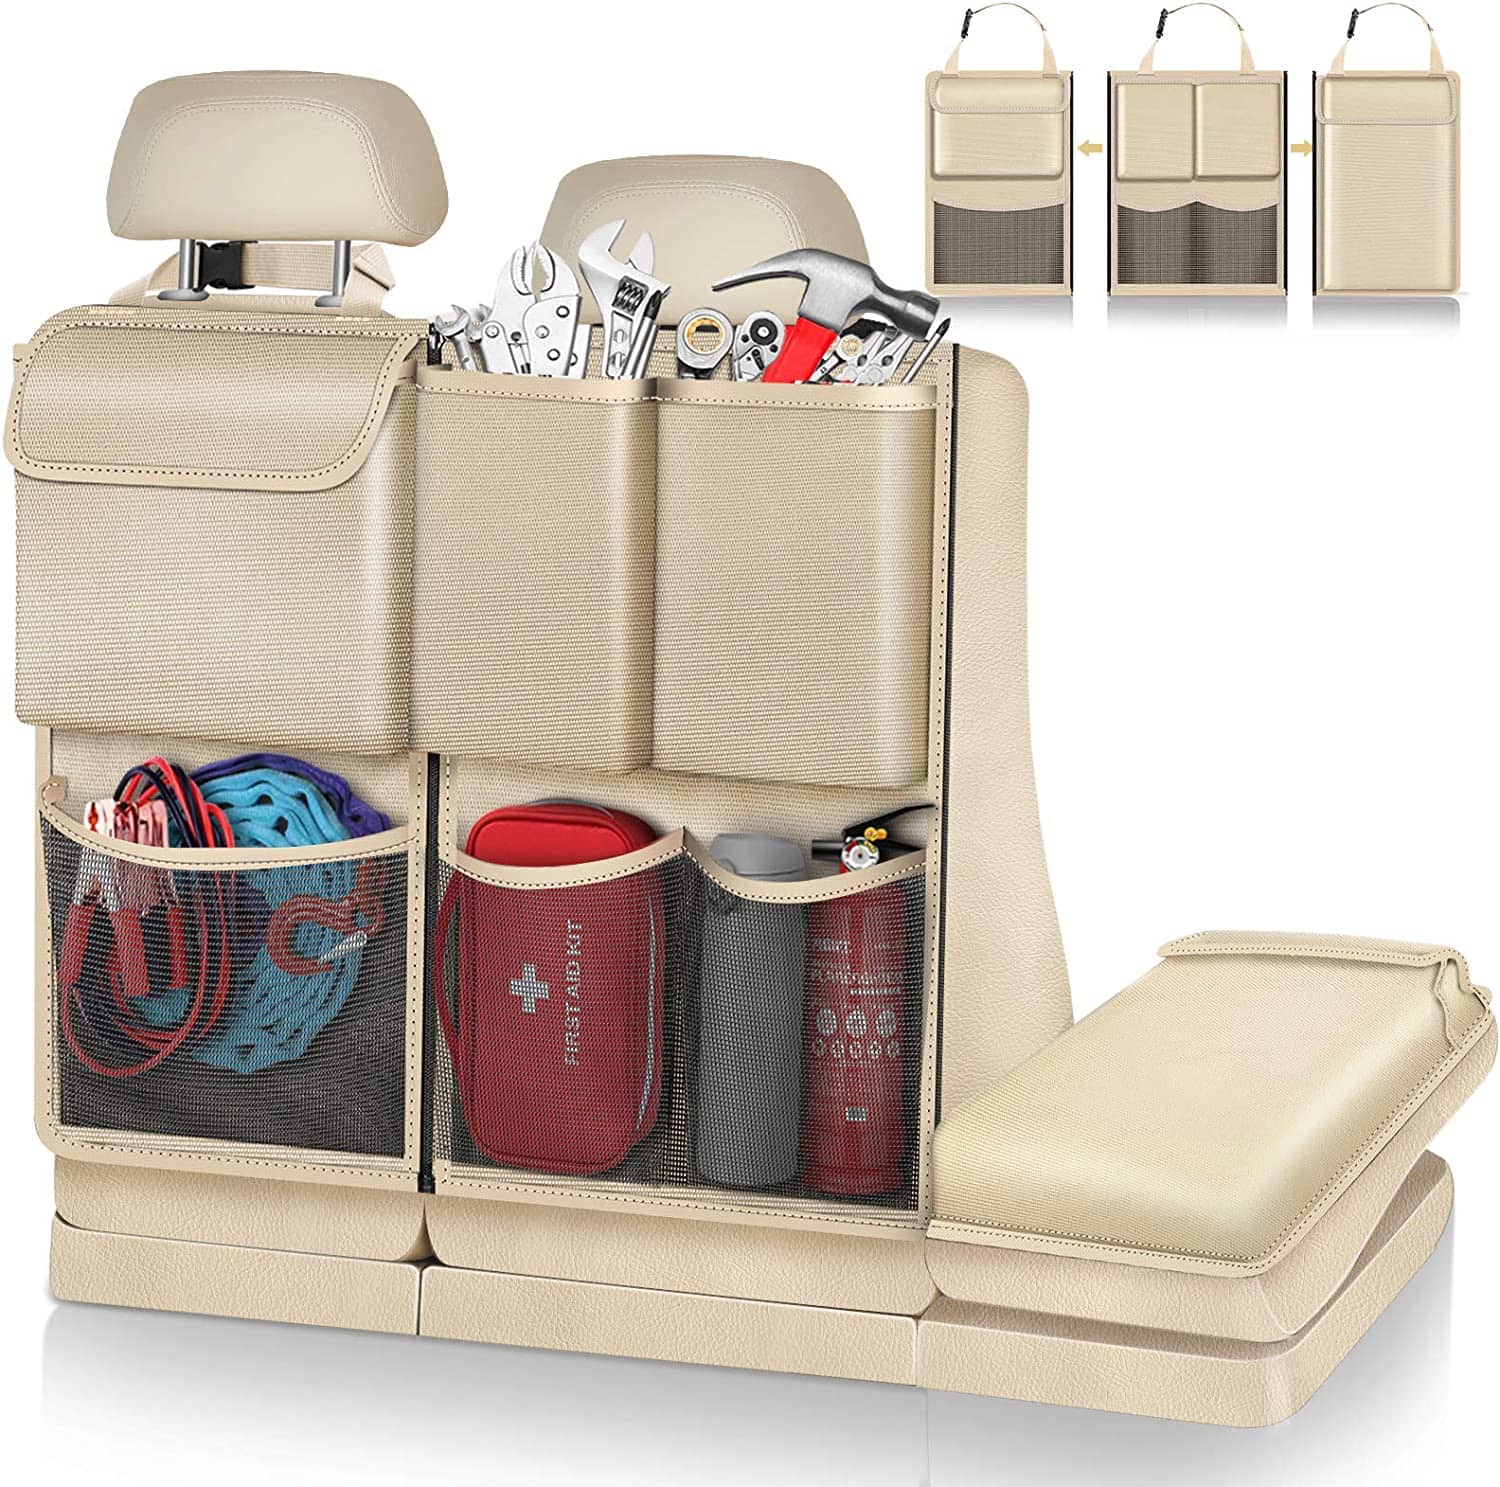 Trunk organizer for SUV that hangs on the back of the seat